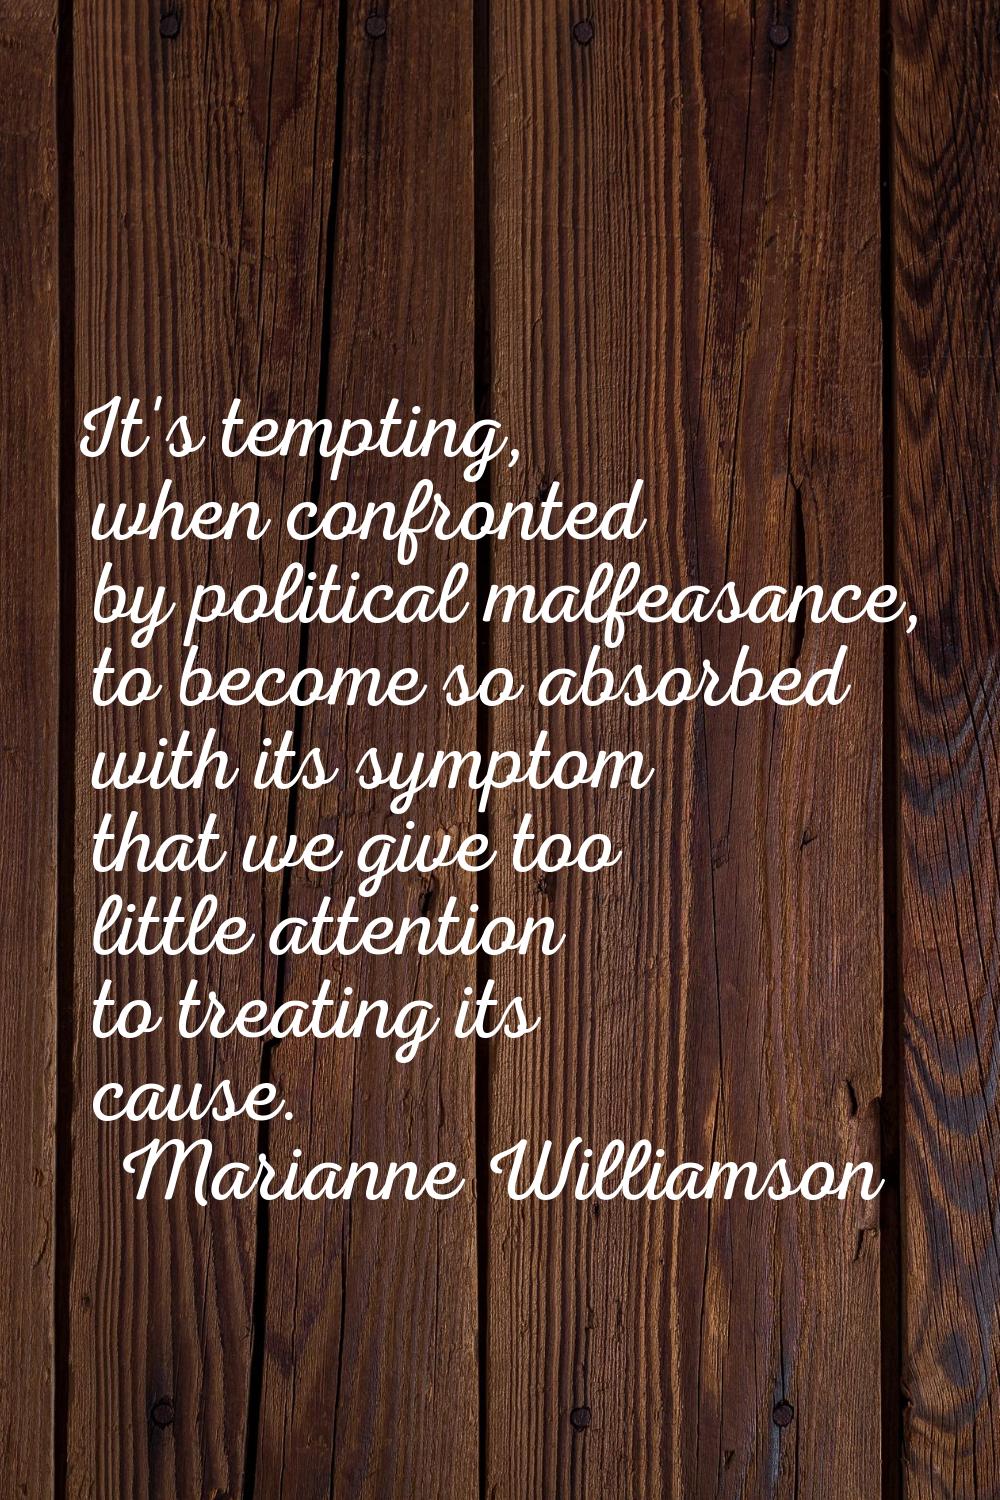 It's tempting, when confronted by political malfeasance, to become so absorbed with its symptom tha